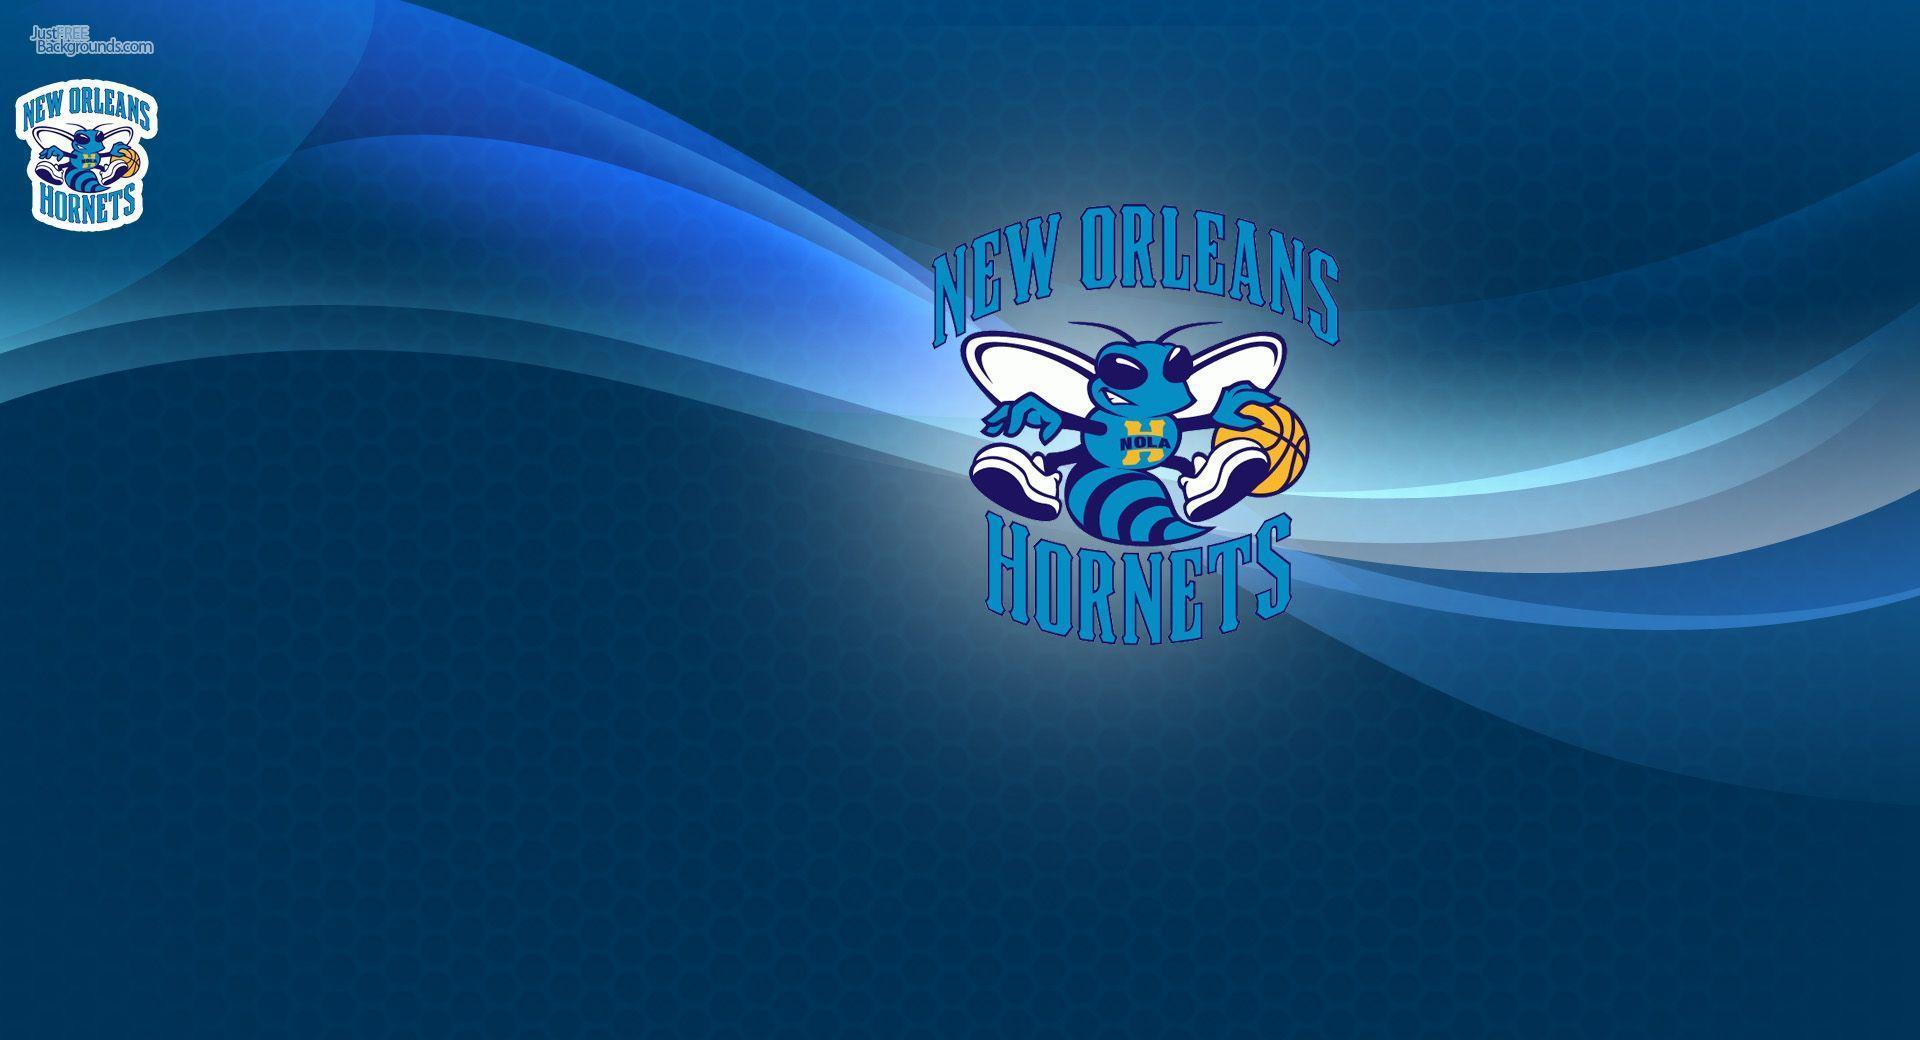 OC] Hornets Wallpapers I made - One Hive : r/CharlotteHornets